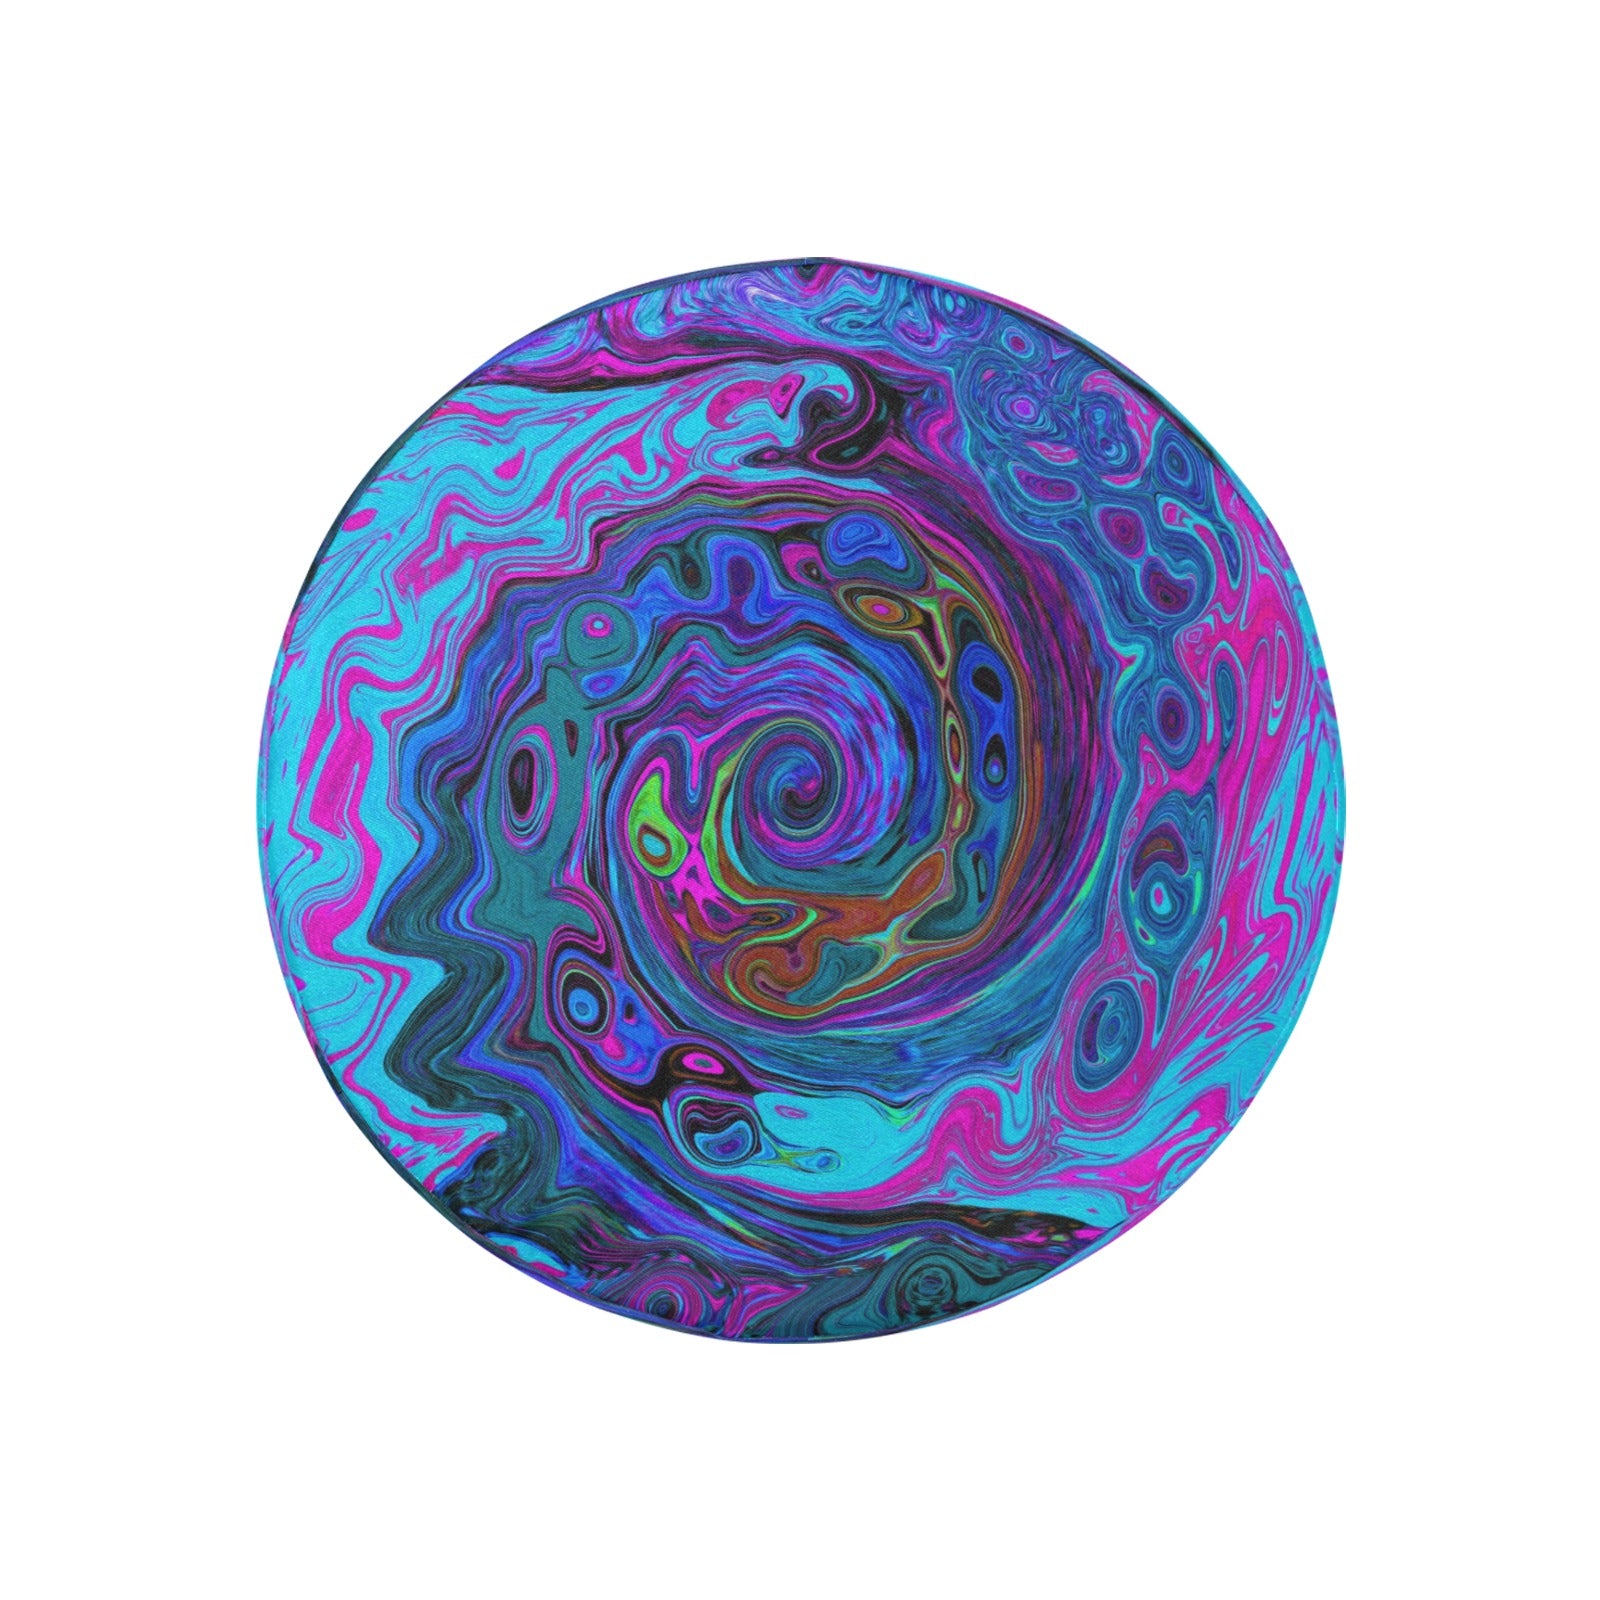 Spare Tire Covers, Groovy Abstract Retro Blue and Purple Swirl - Small